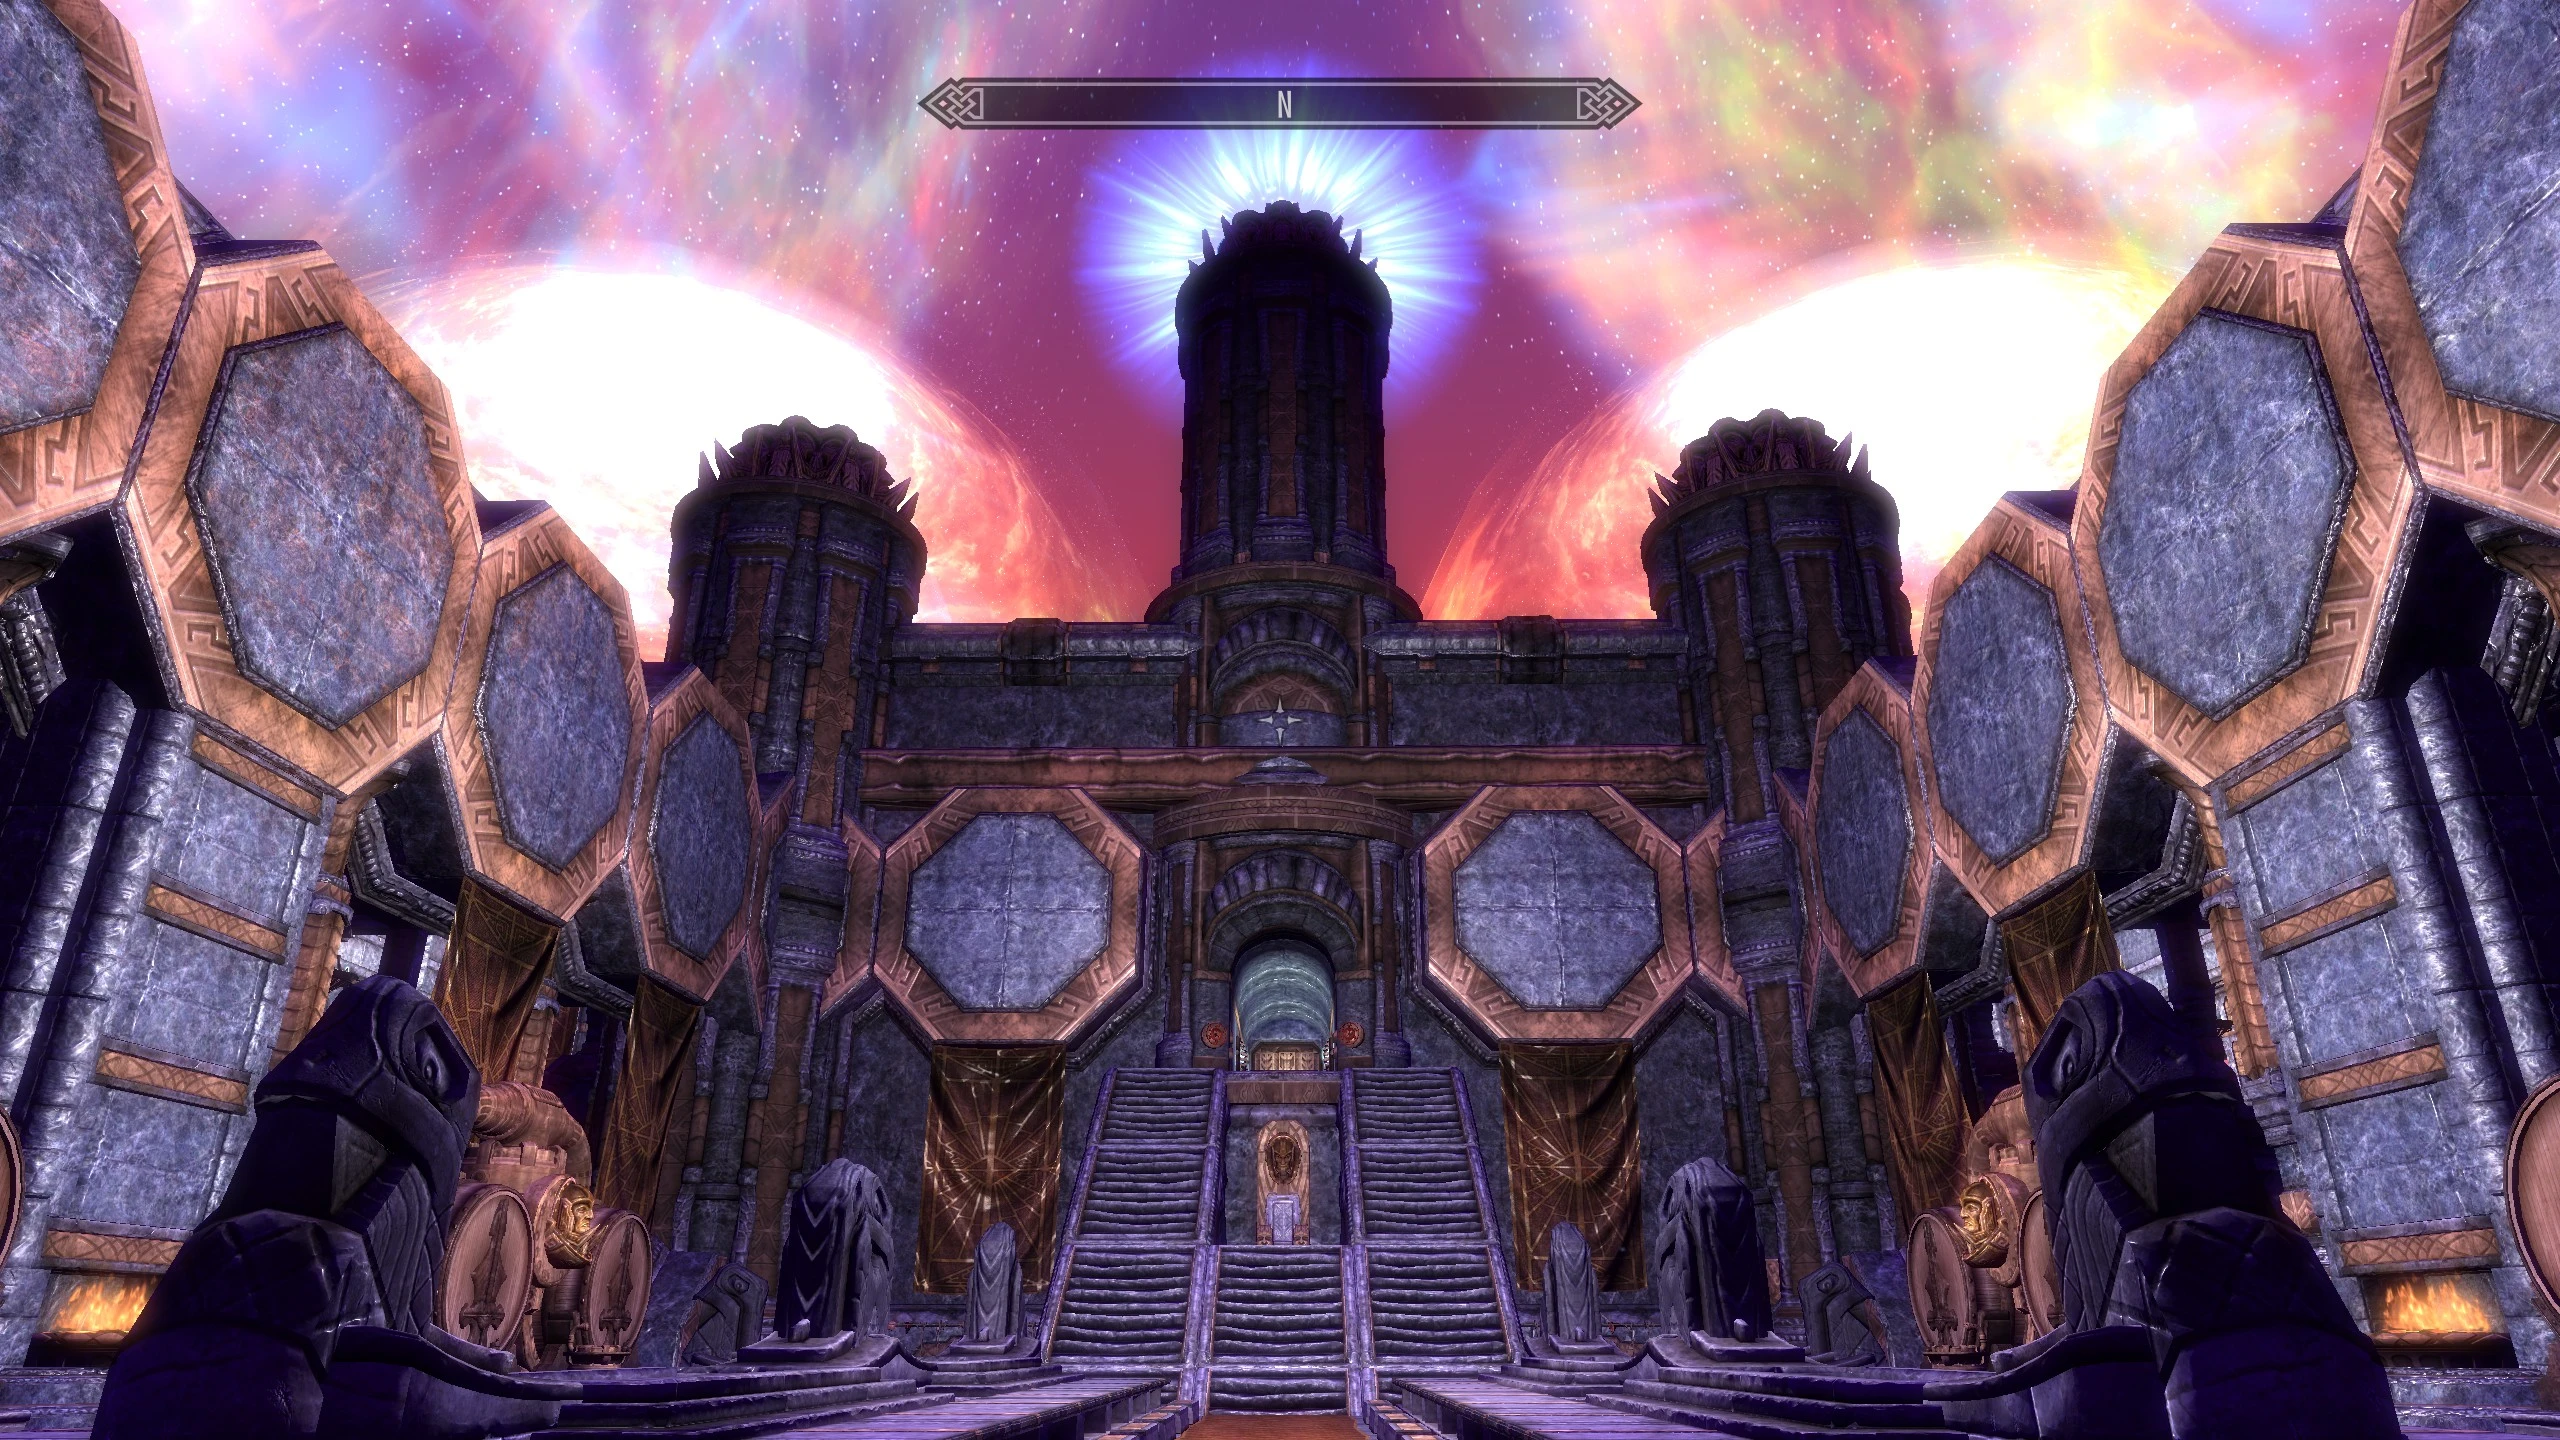 Dwemer Aetherial Palace update 2 Throne room.